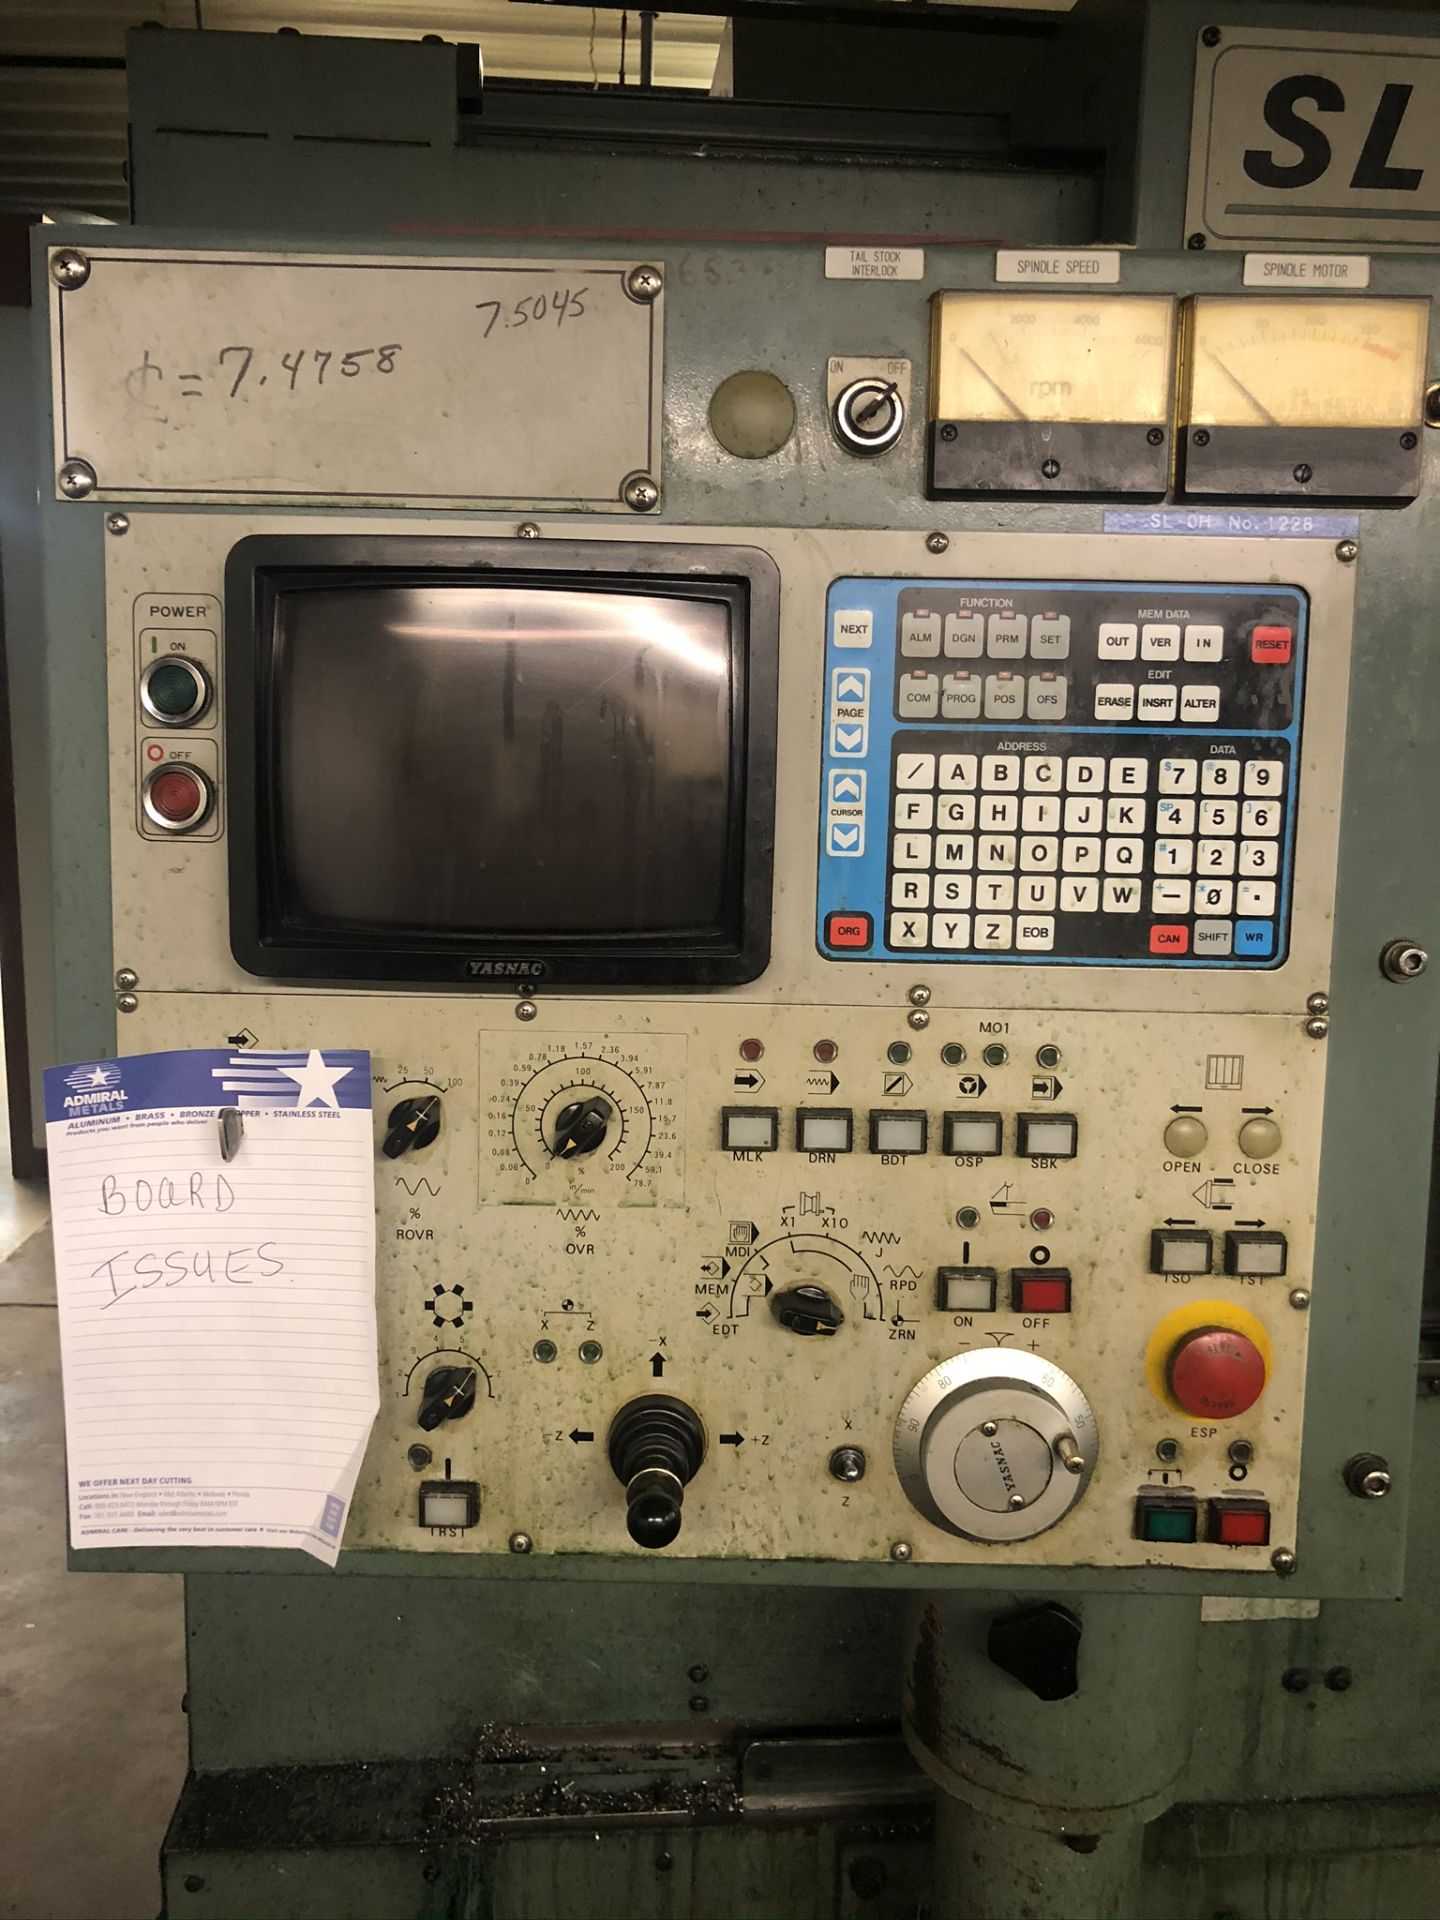 Mori Seiki Model SL-OH CNC Lathe, S/N 1228. Equipped with Yasnac CNC Control - Image 2 of 5